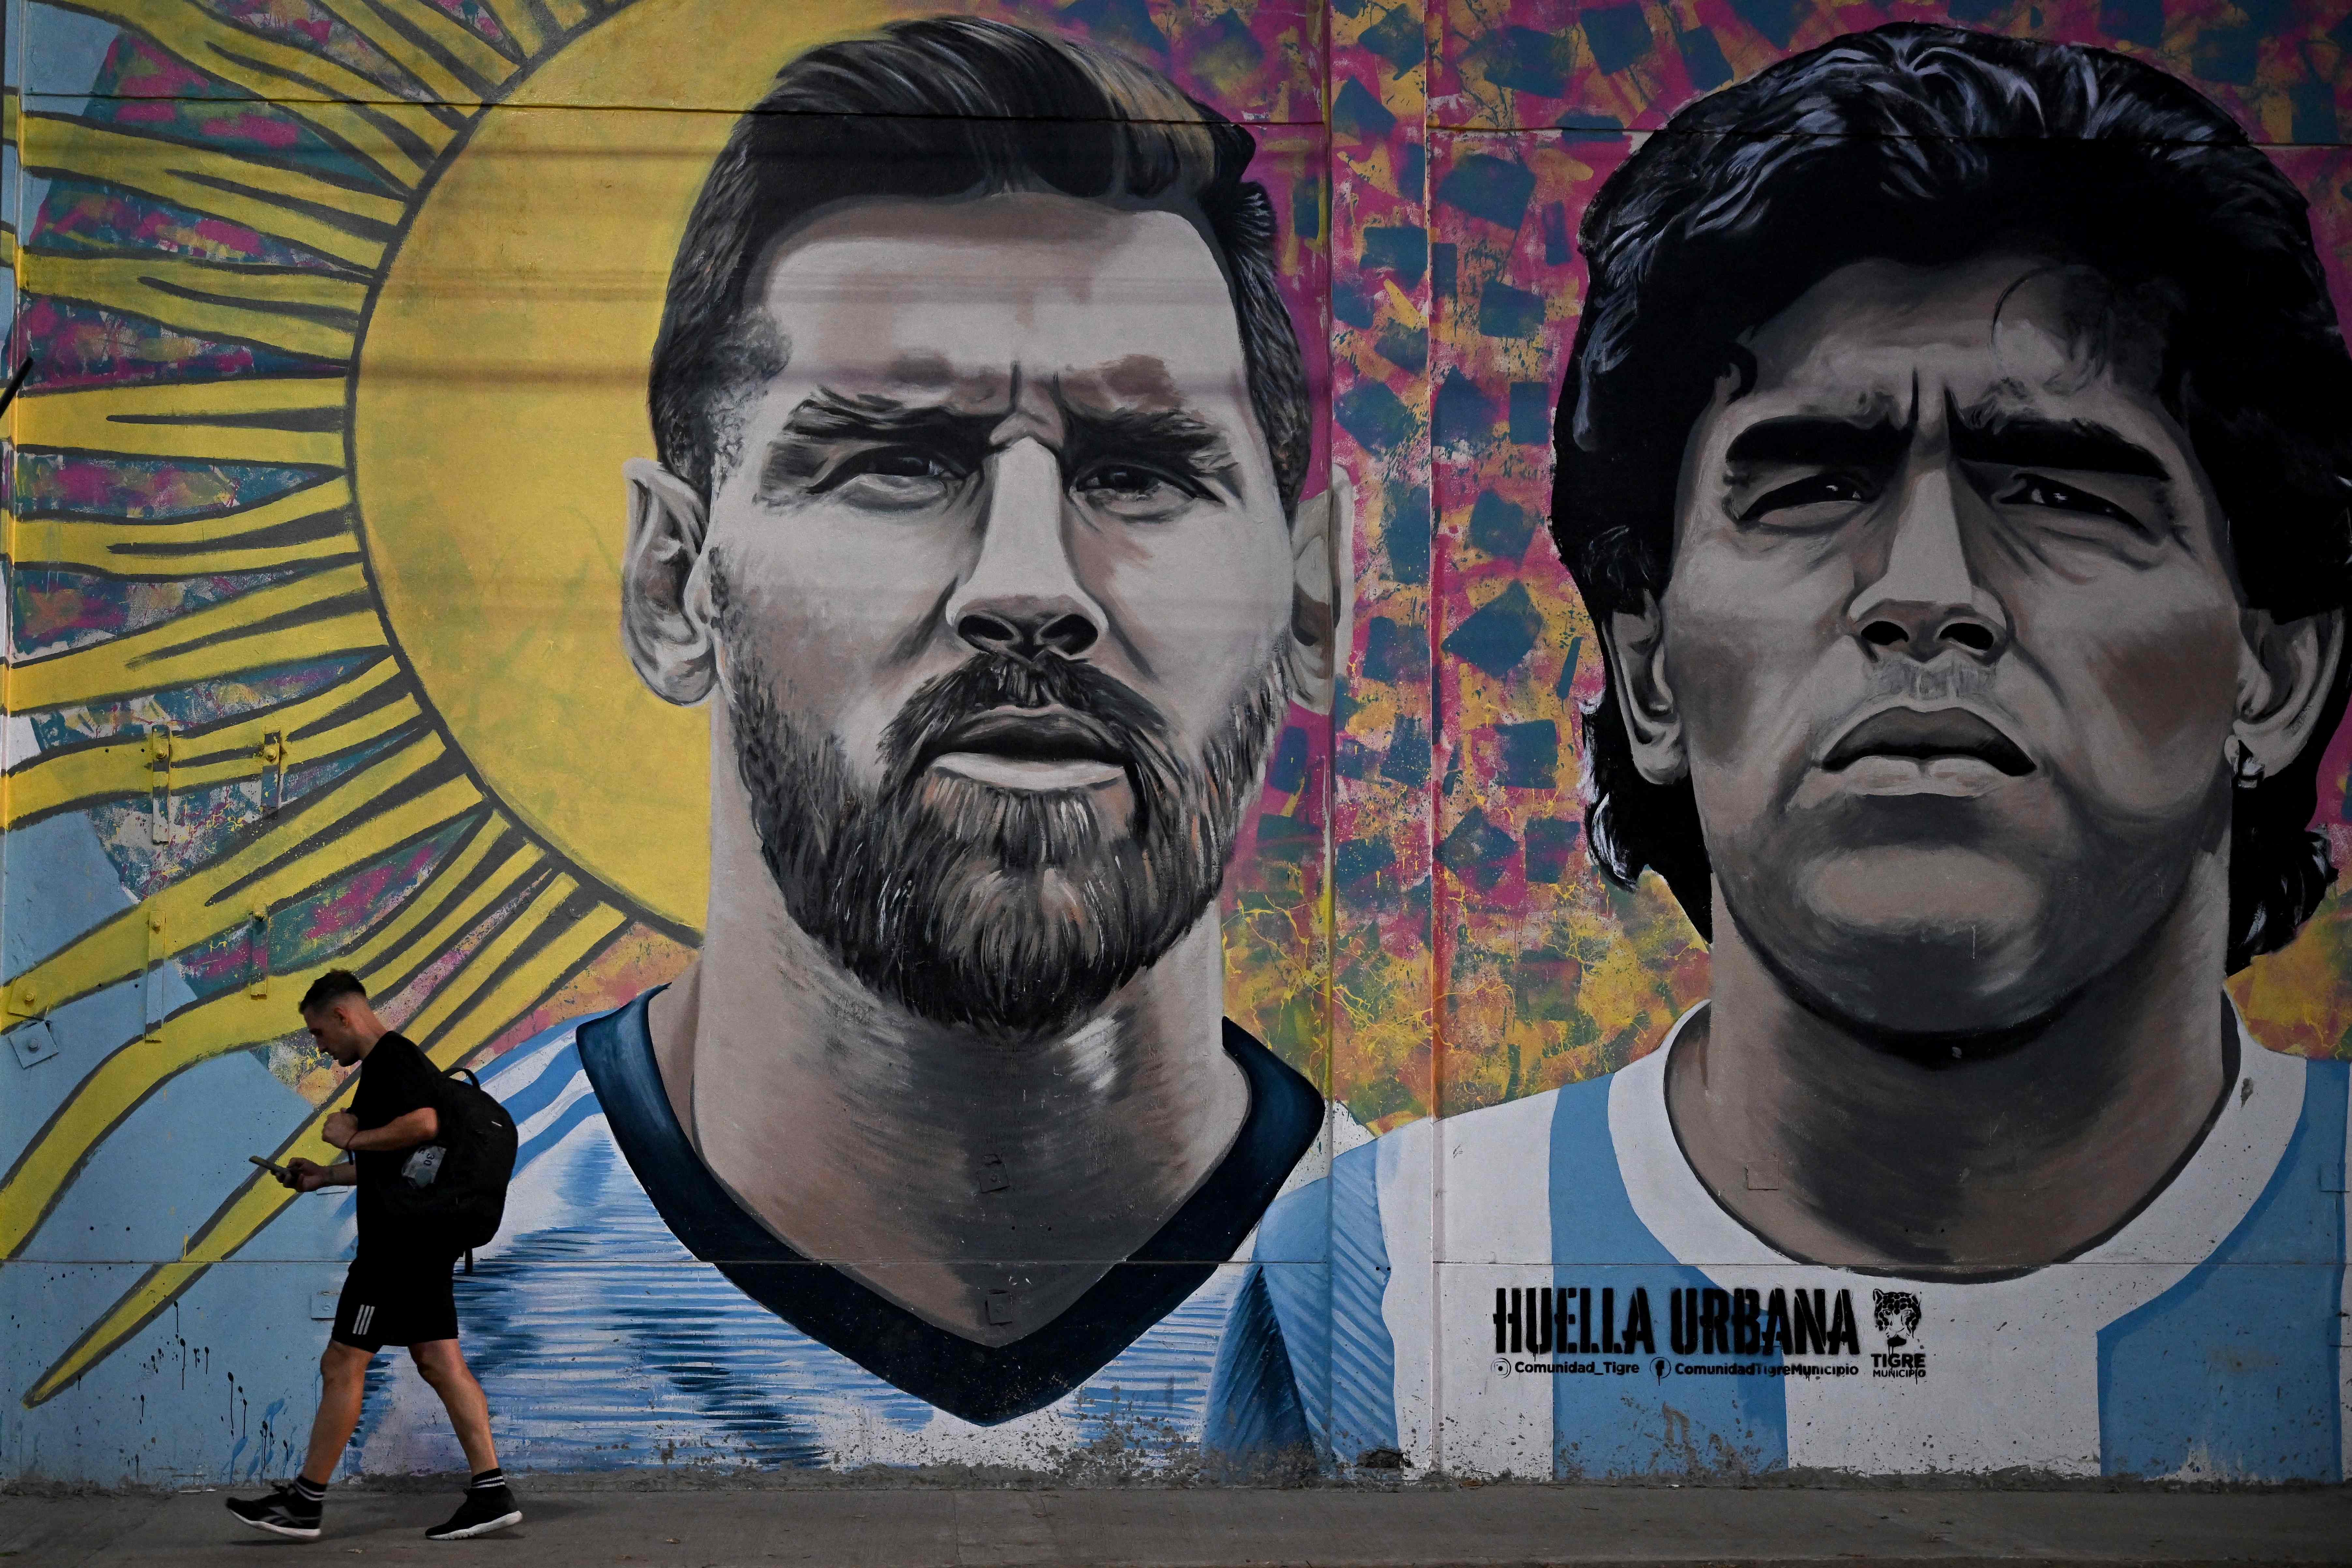 A mural in Buenos Aires depicting Argentina icons Lionel Messi and Diego Maradona